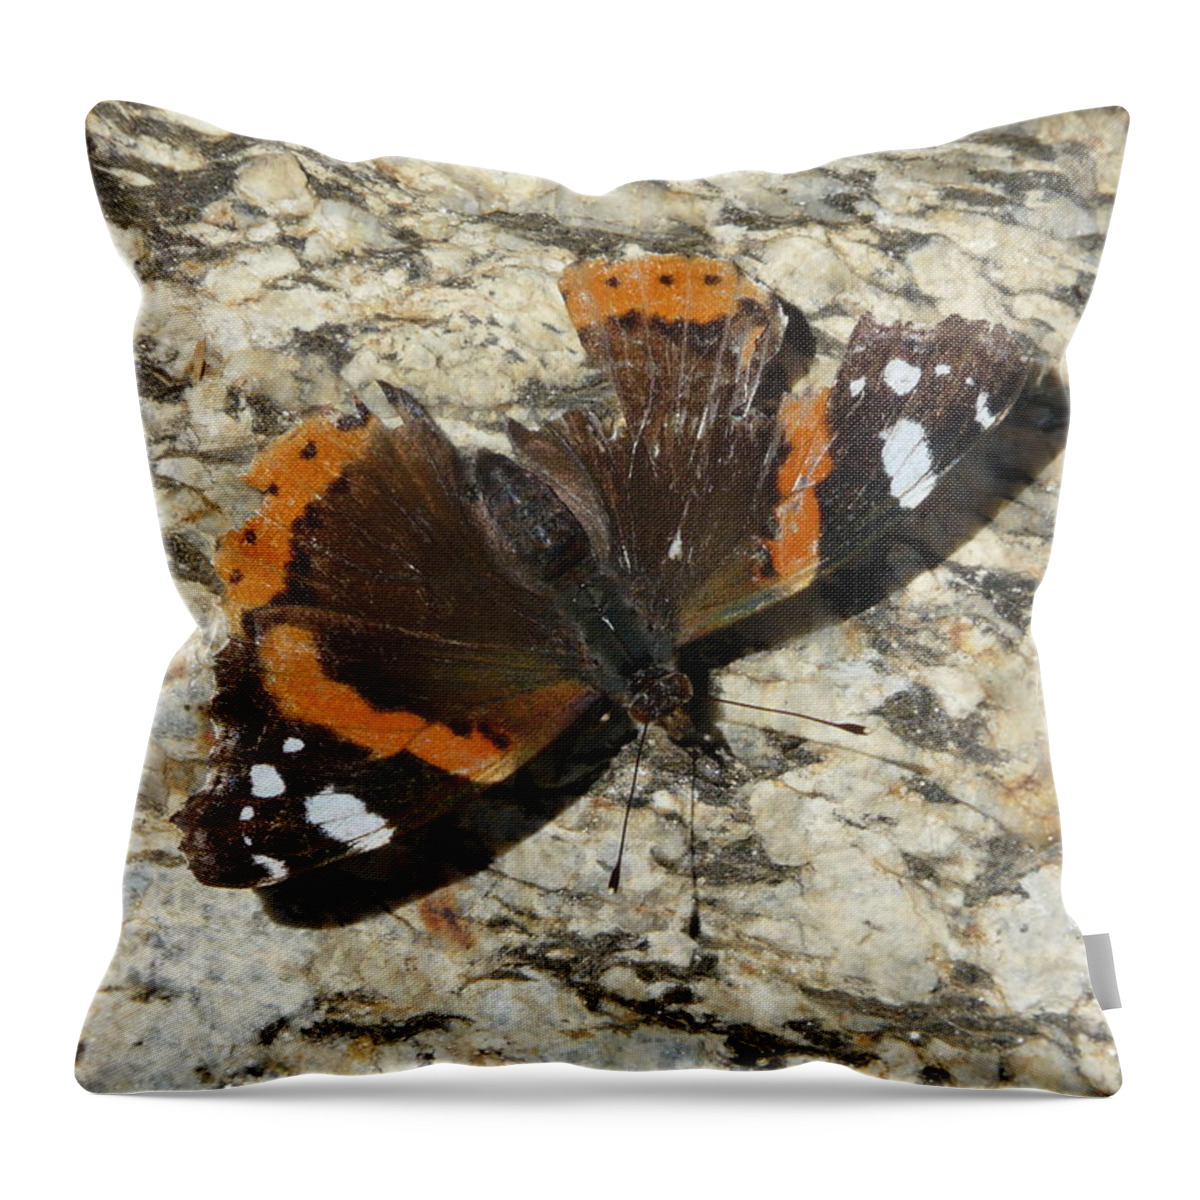 Butterfly Throw Pillow featuring the photograph Battered Butterfly by Valerie Ornstein